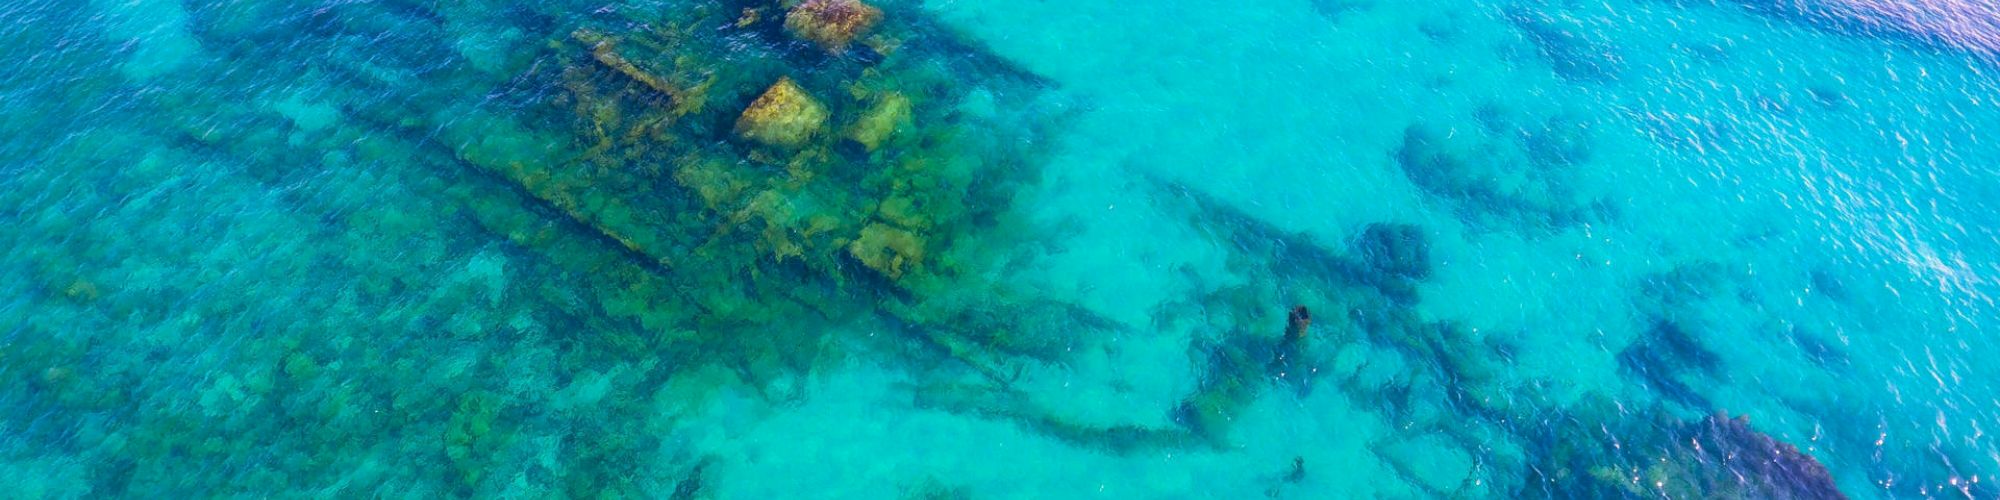 The image shows a sunken shipwreck in clear blue-green shallow water. The outline of the ship is visible beneath the surface.